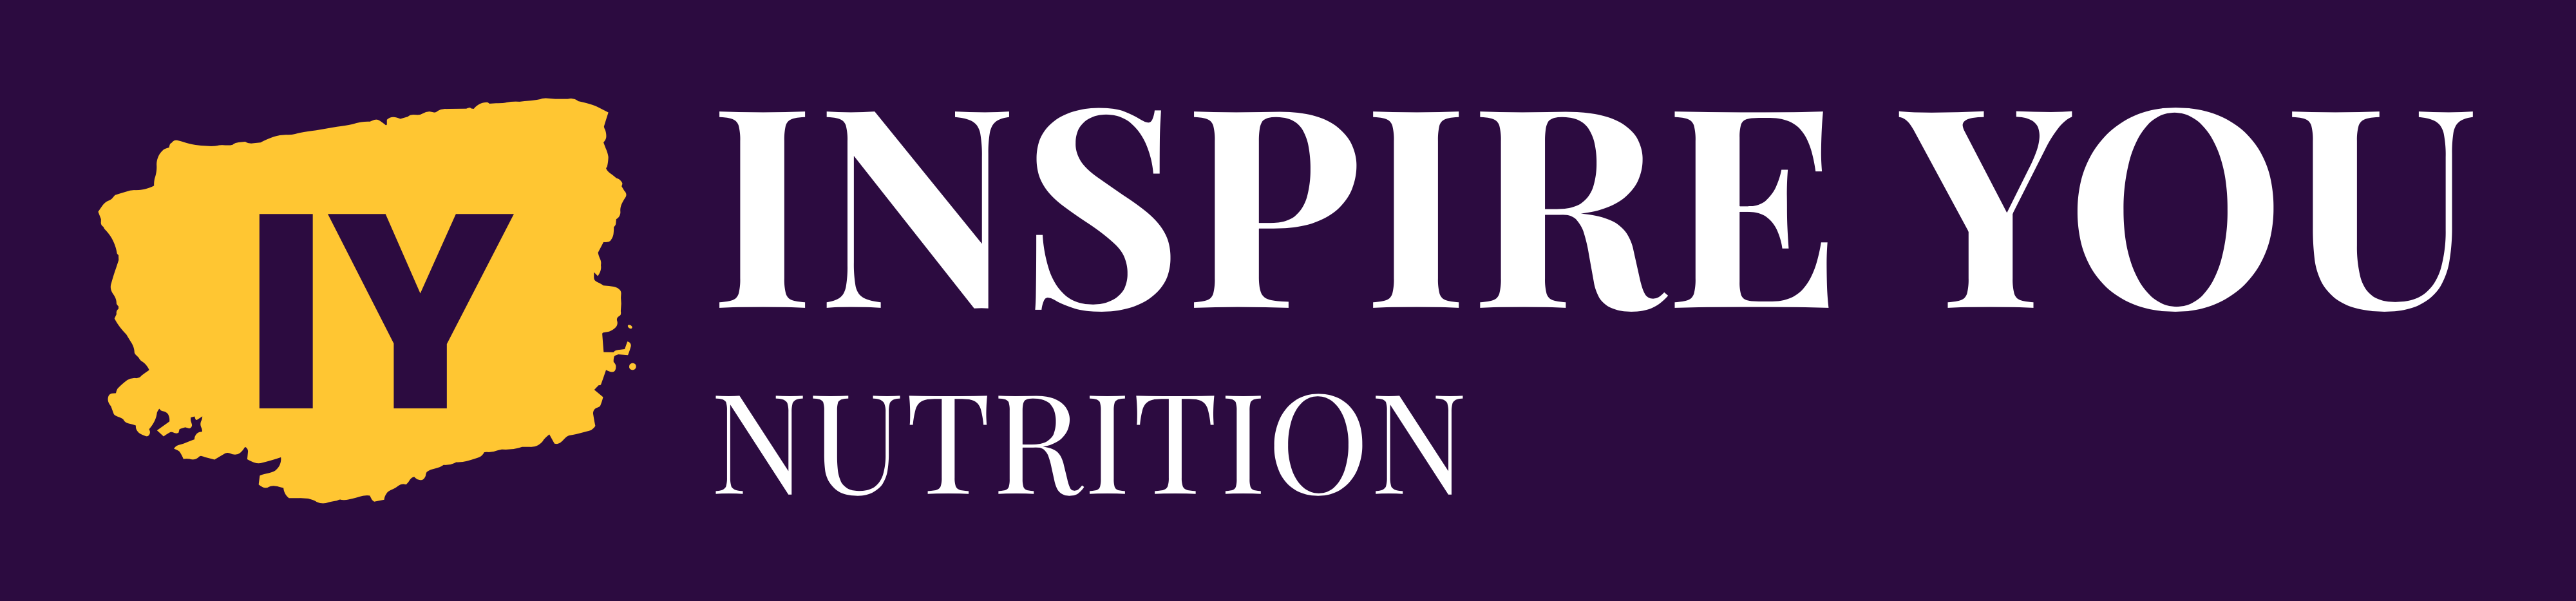 Inspire You Nutrition